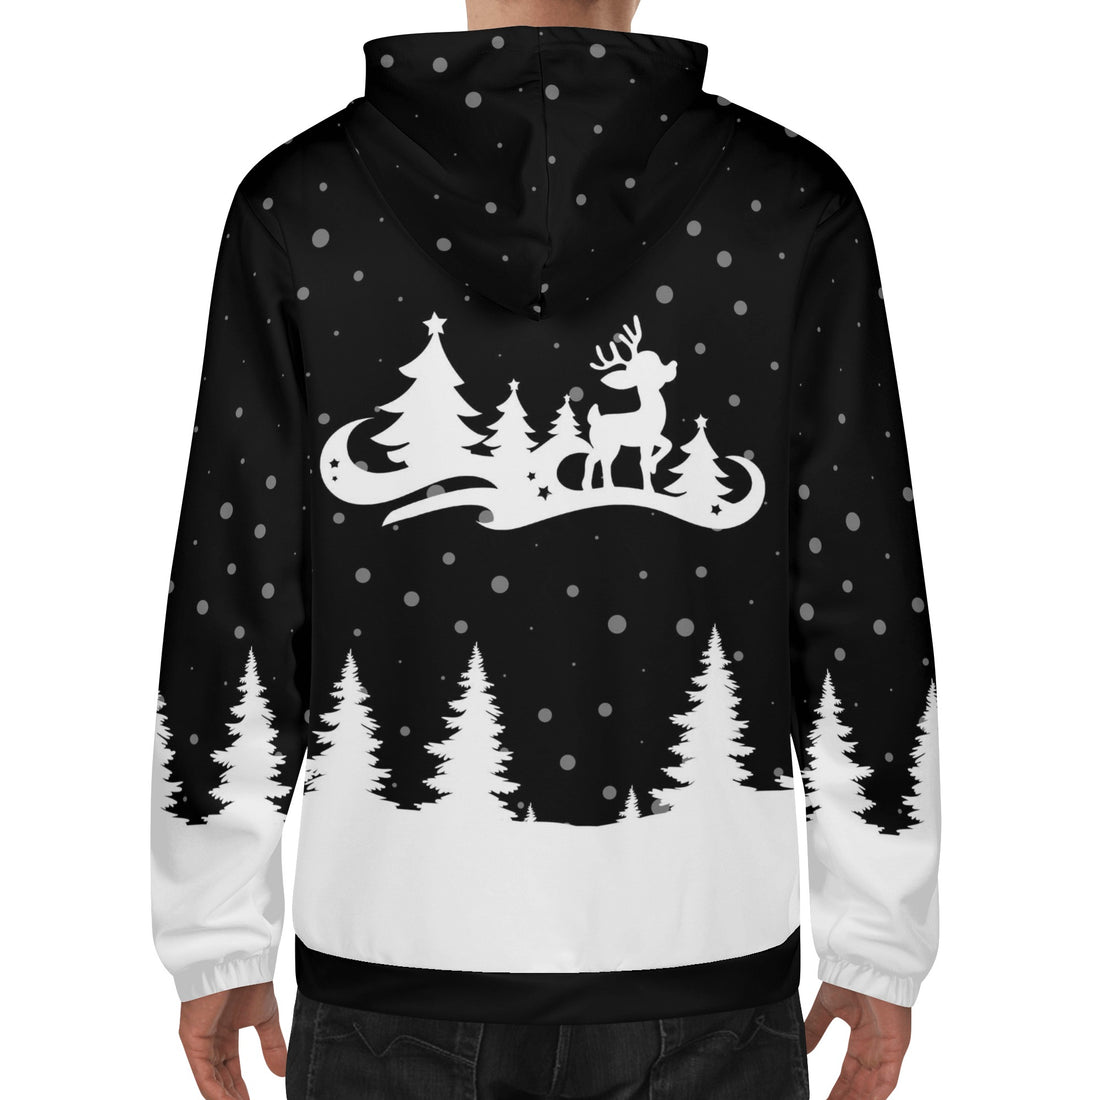 Mens Lightweight All Over Printing Hoodie Sweatshirt Christmas Home-clothes-jewelry